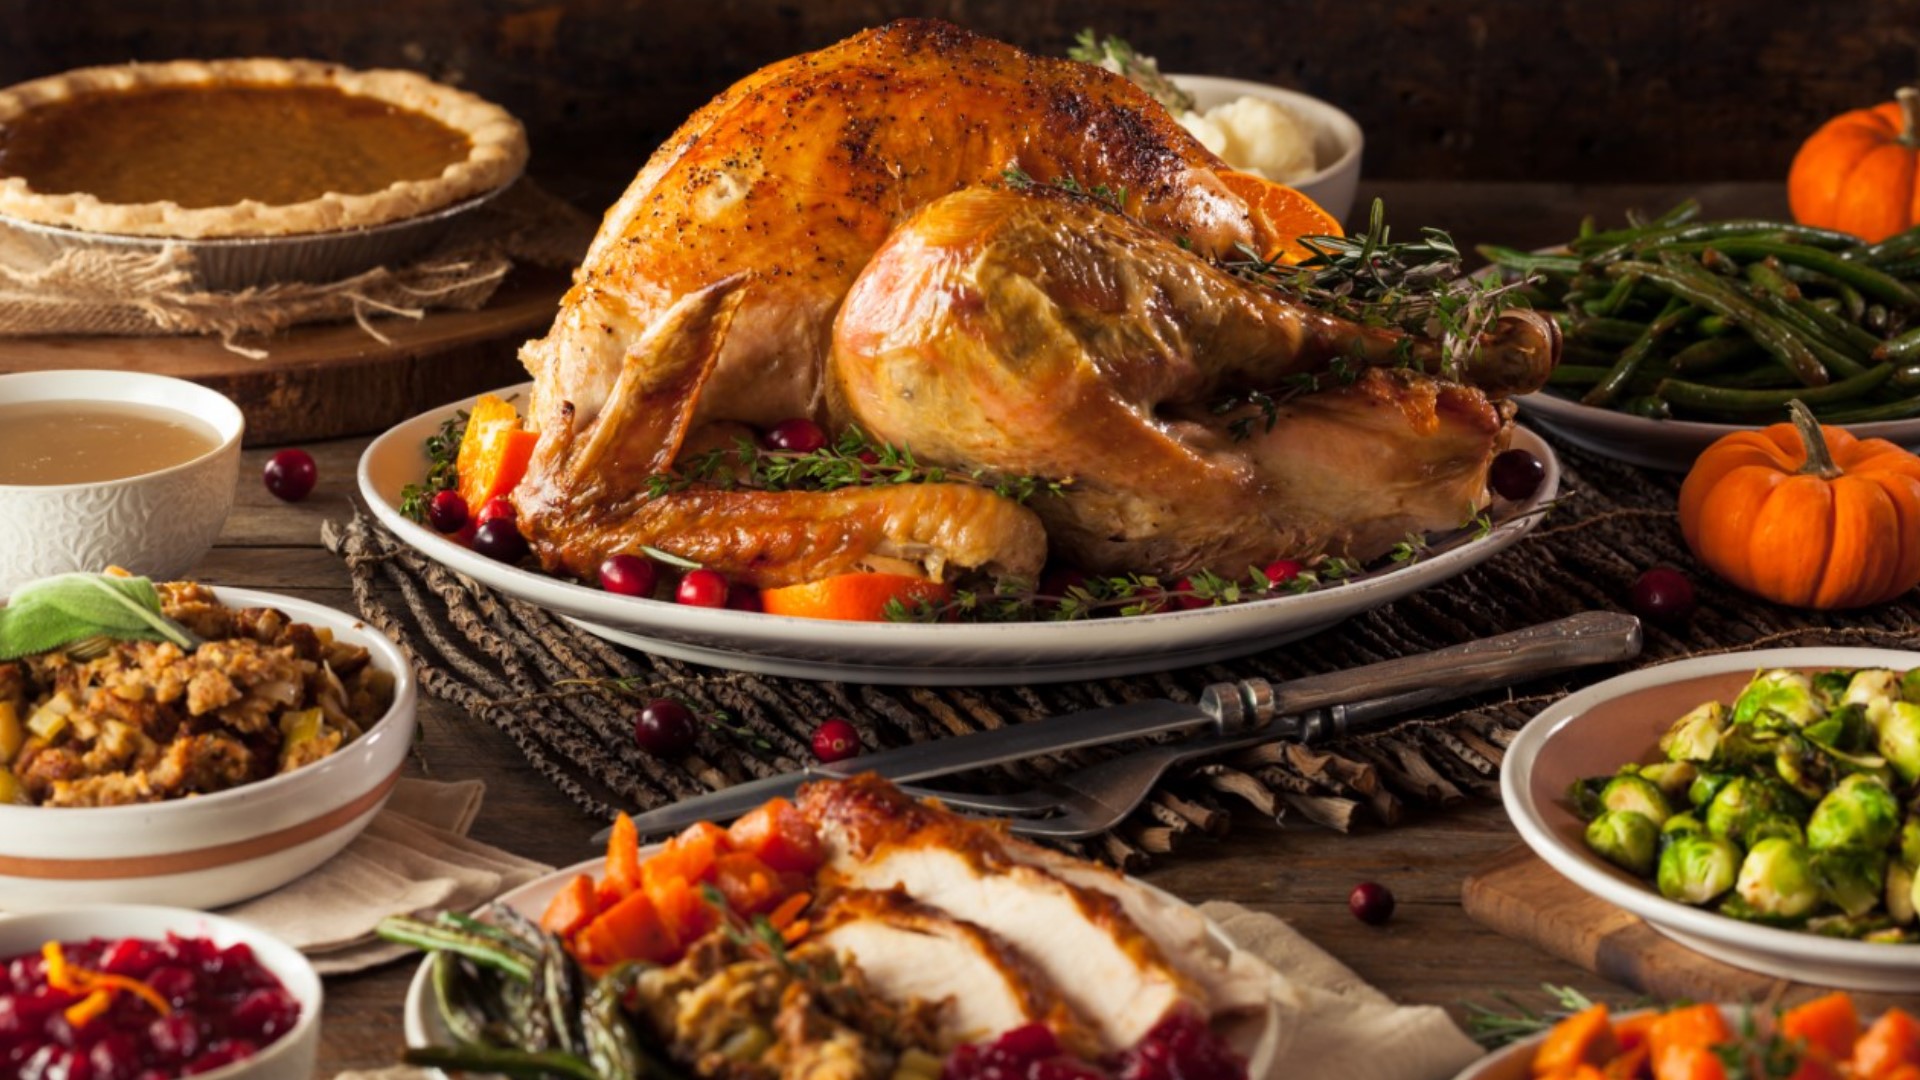 The Queen's early Thanksgiving shopping guide has the tips you need to save money this year.